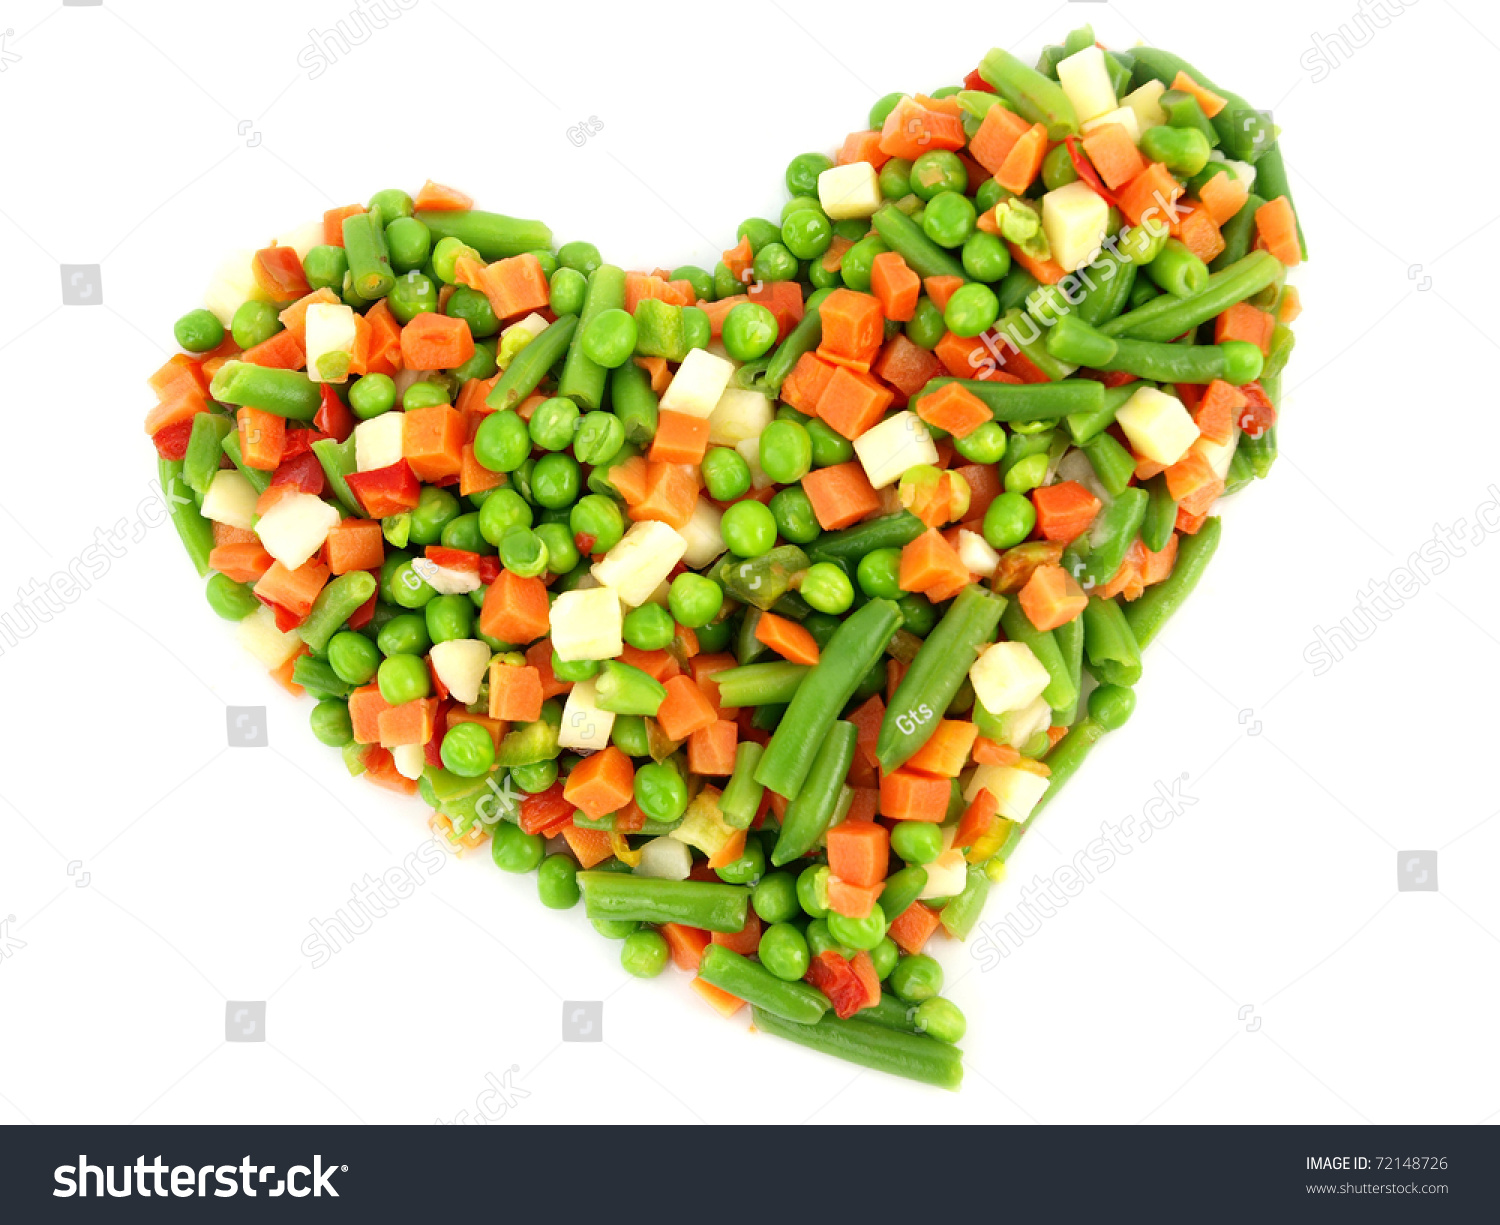 Heart of a frozen mixed vegetables isolated on white background #72148726